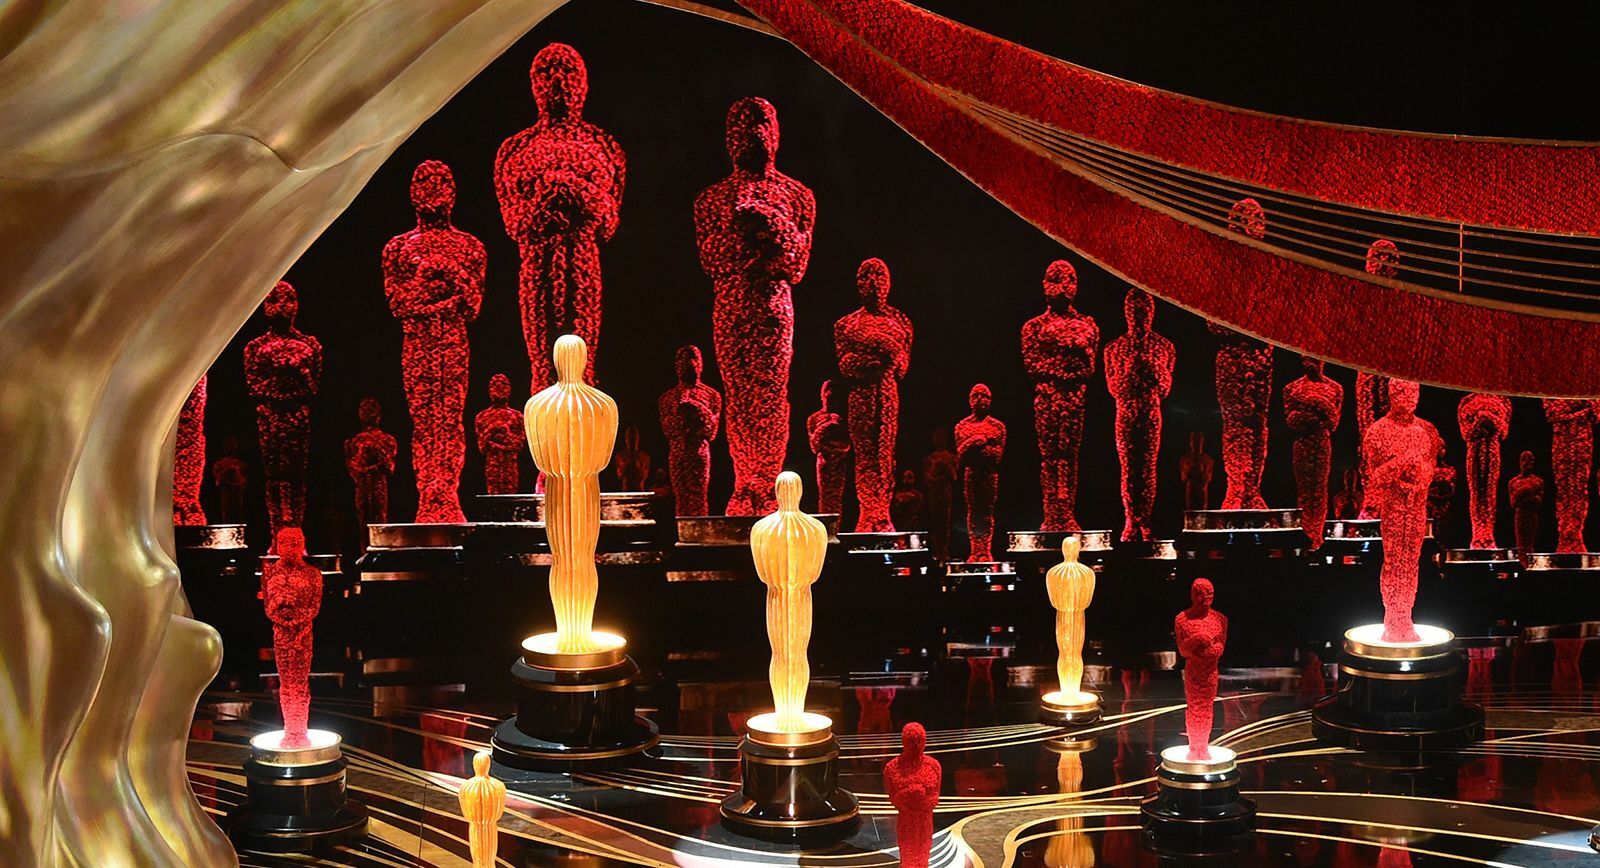 Oscars 2019: The jewellery highlights of this year’s awards